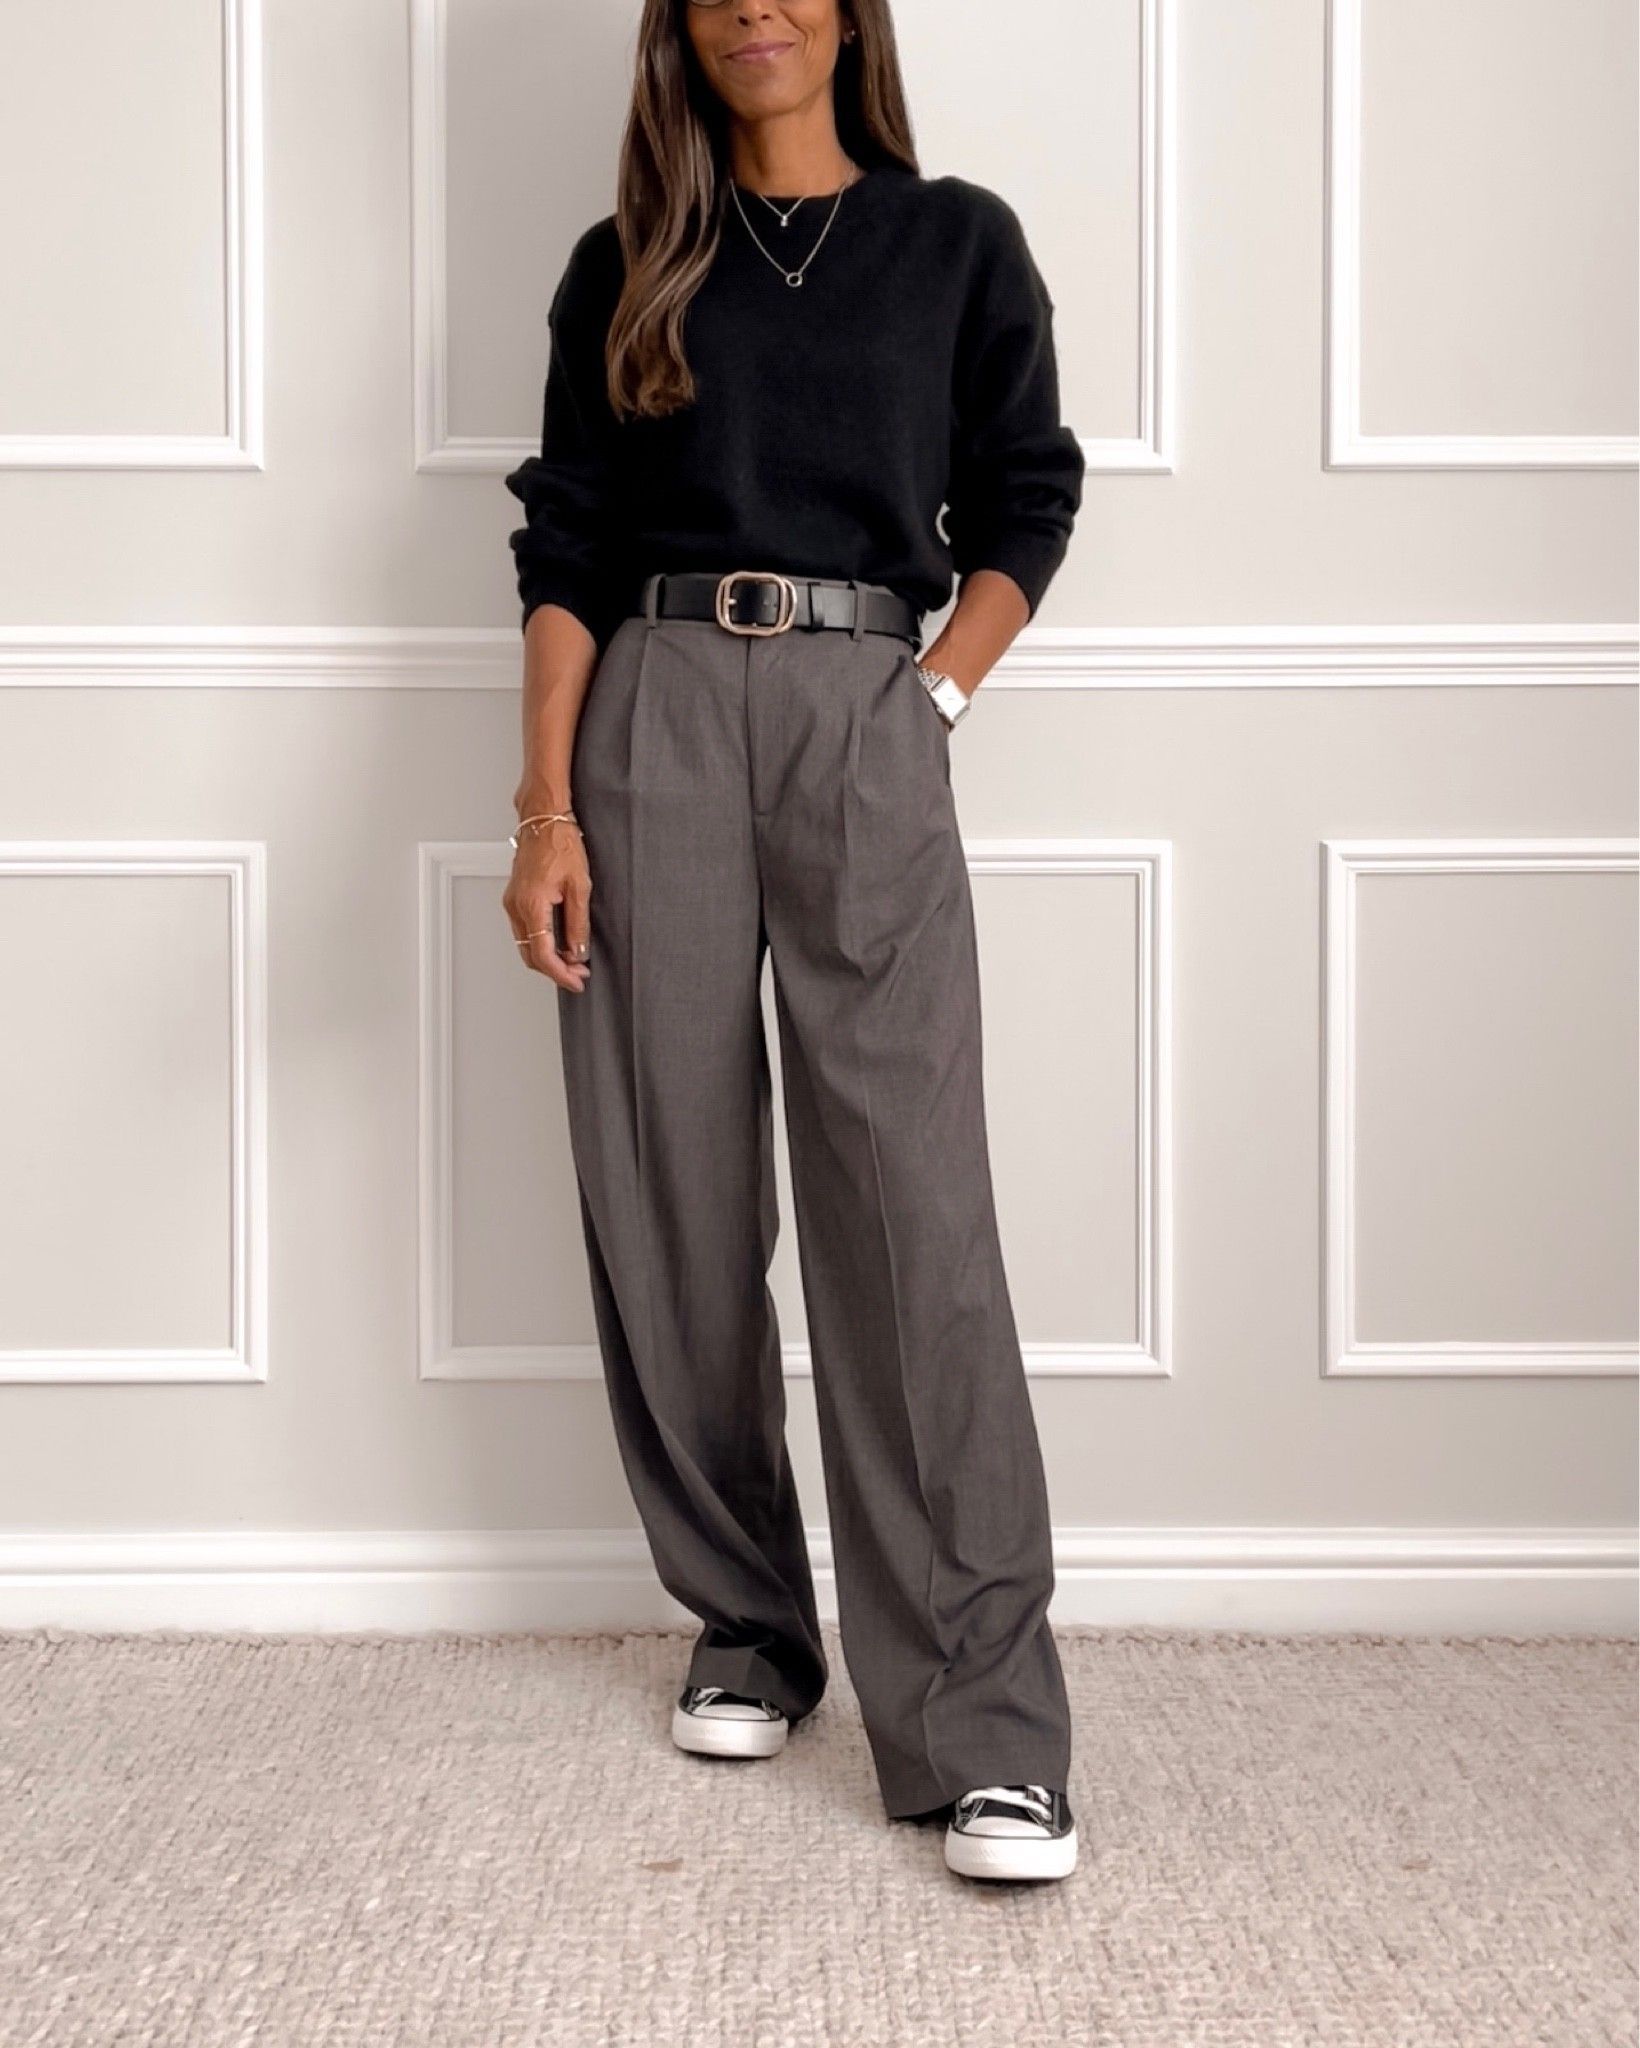 Get professional and stylish looks with
work trousers